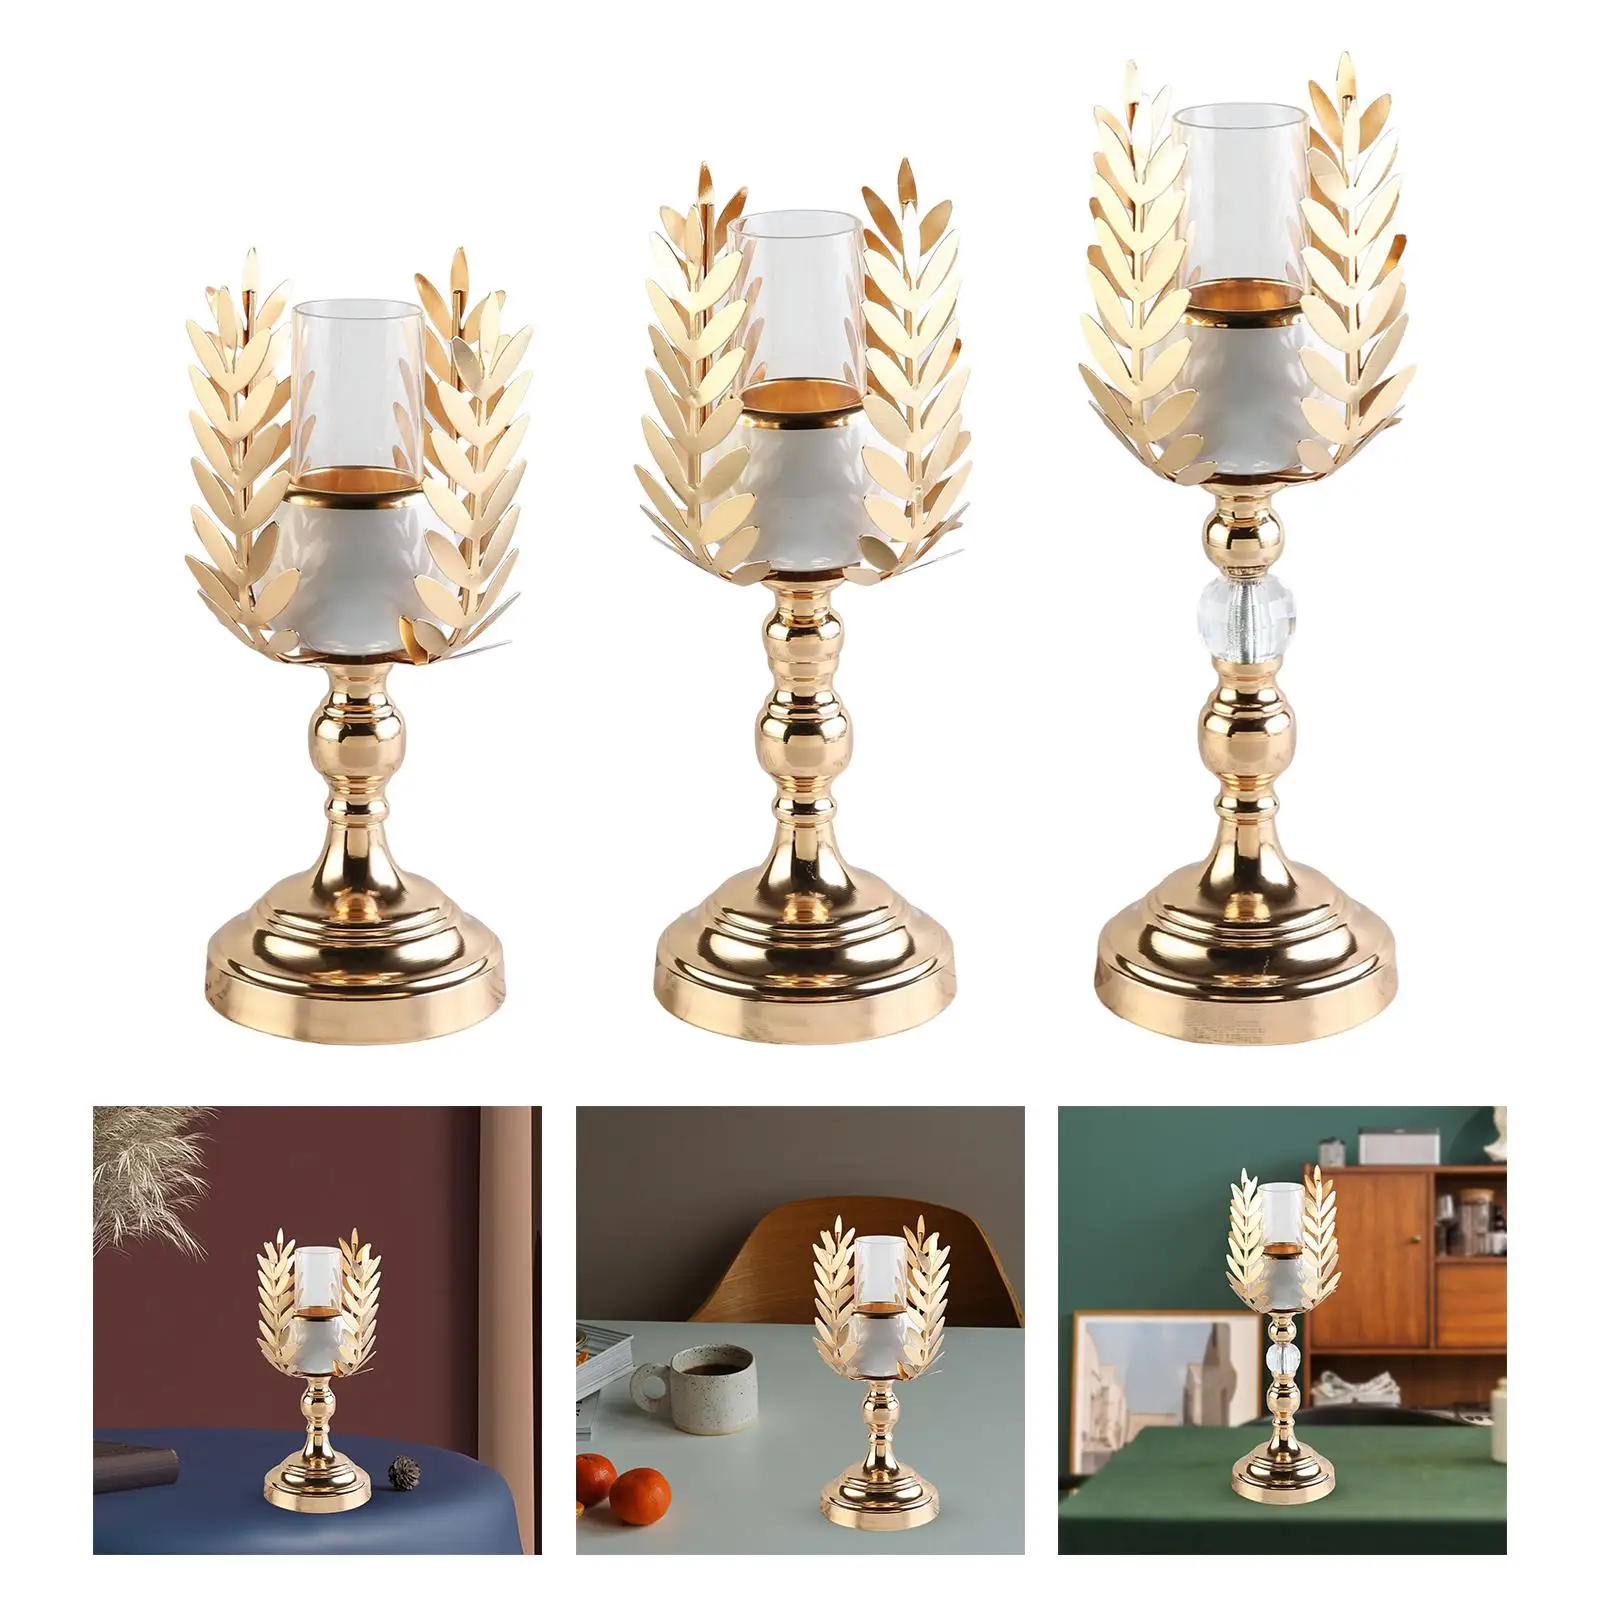 Nordic Style Candelabra Dinner Table Hollow Lamp Centerpiece Olive Branch Shaped Decor for Wedding Celebration Party Table Decor